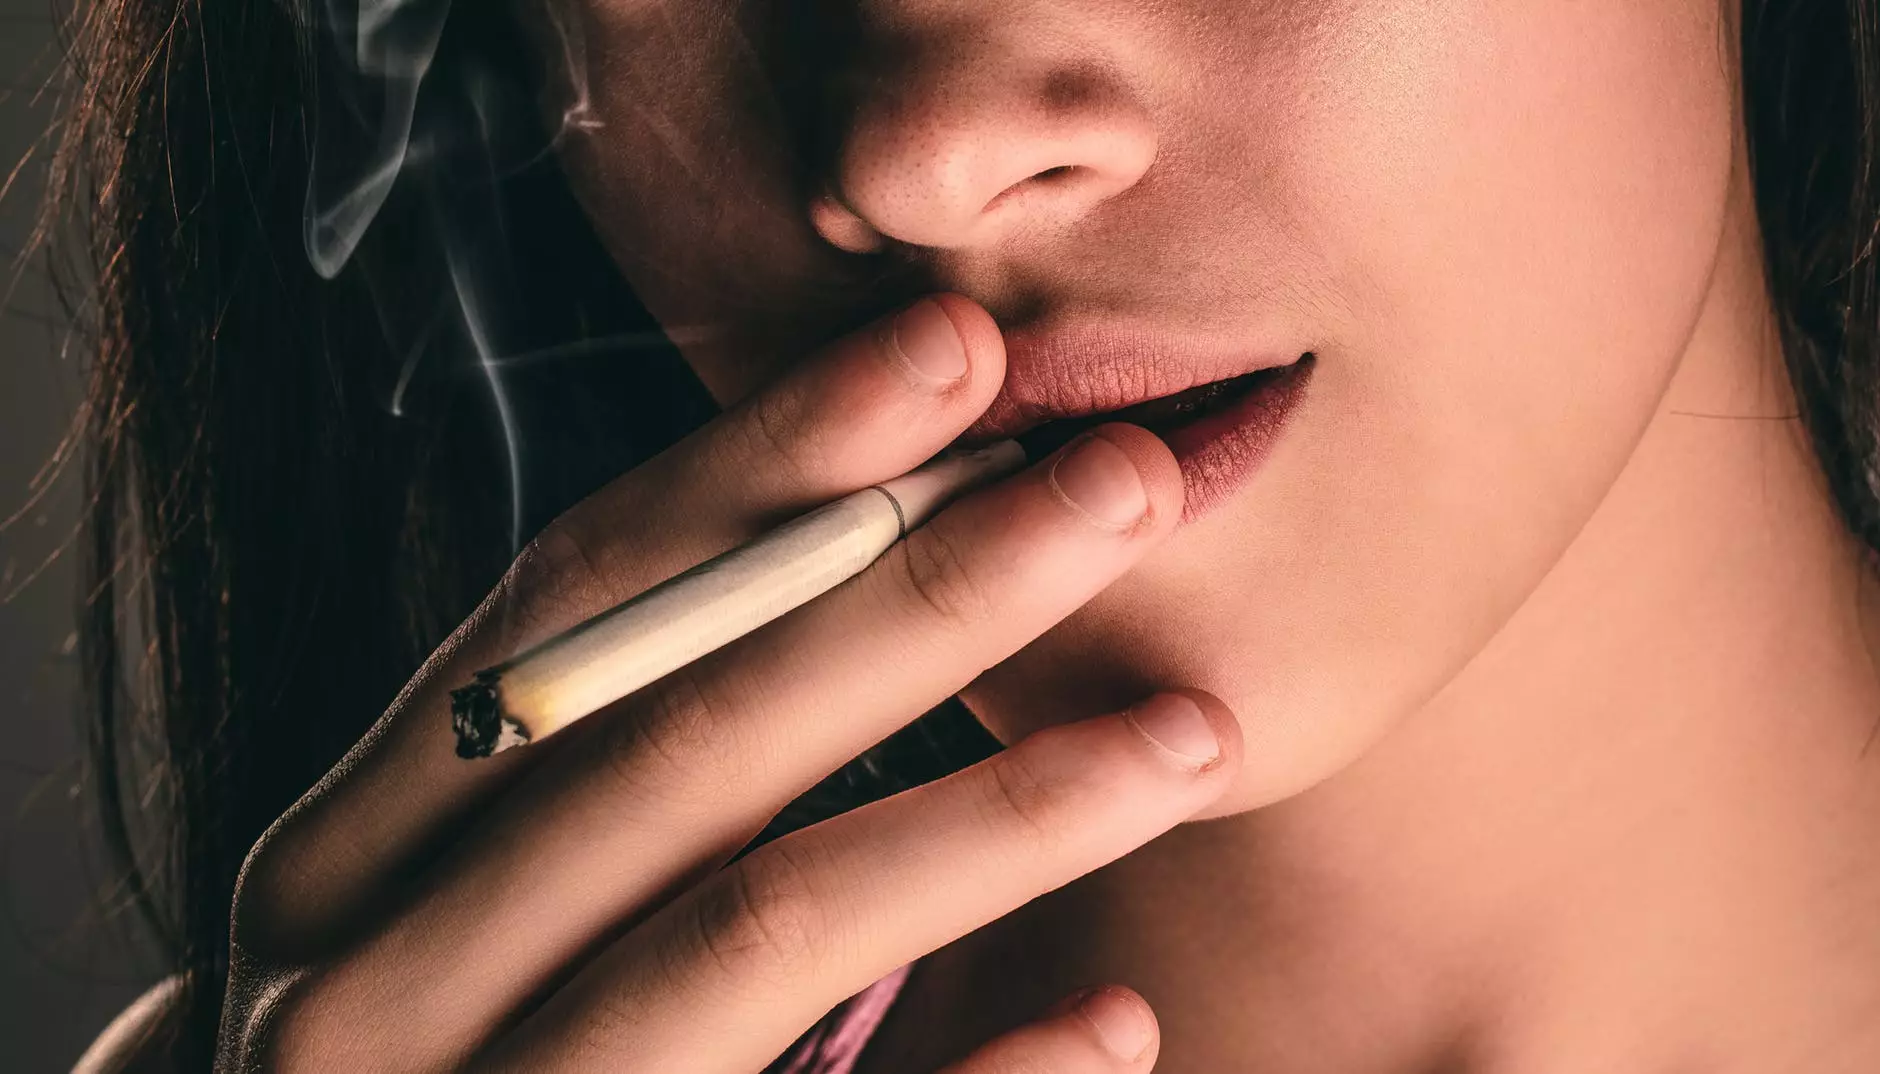 It's estimated that one-in-10 women smoke during their pregnancy.